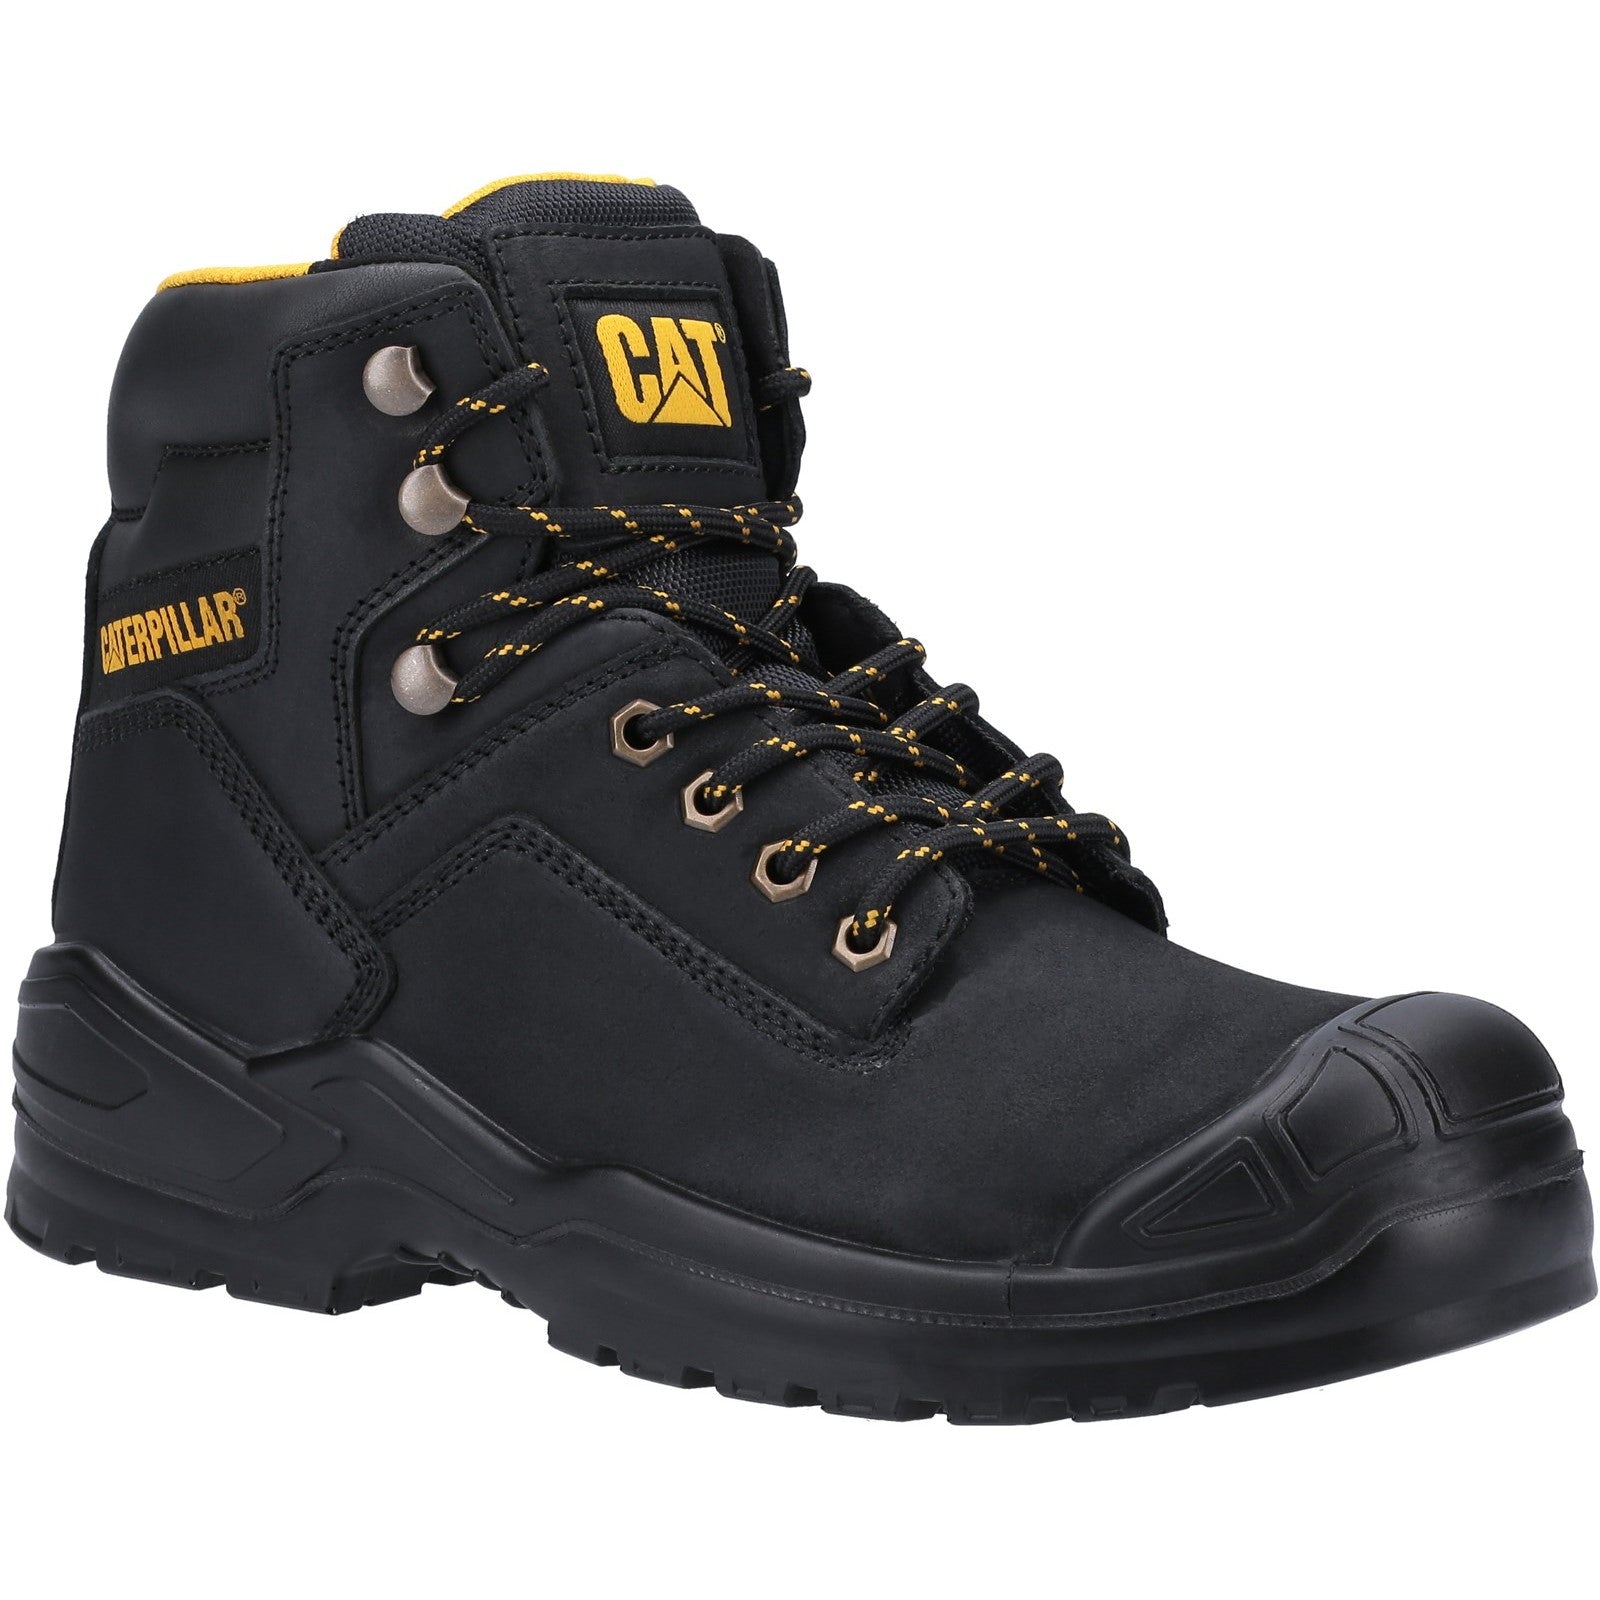 CAT Striver Mid S3 Safety Boot